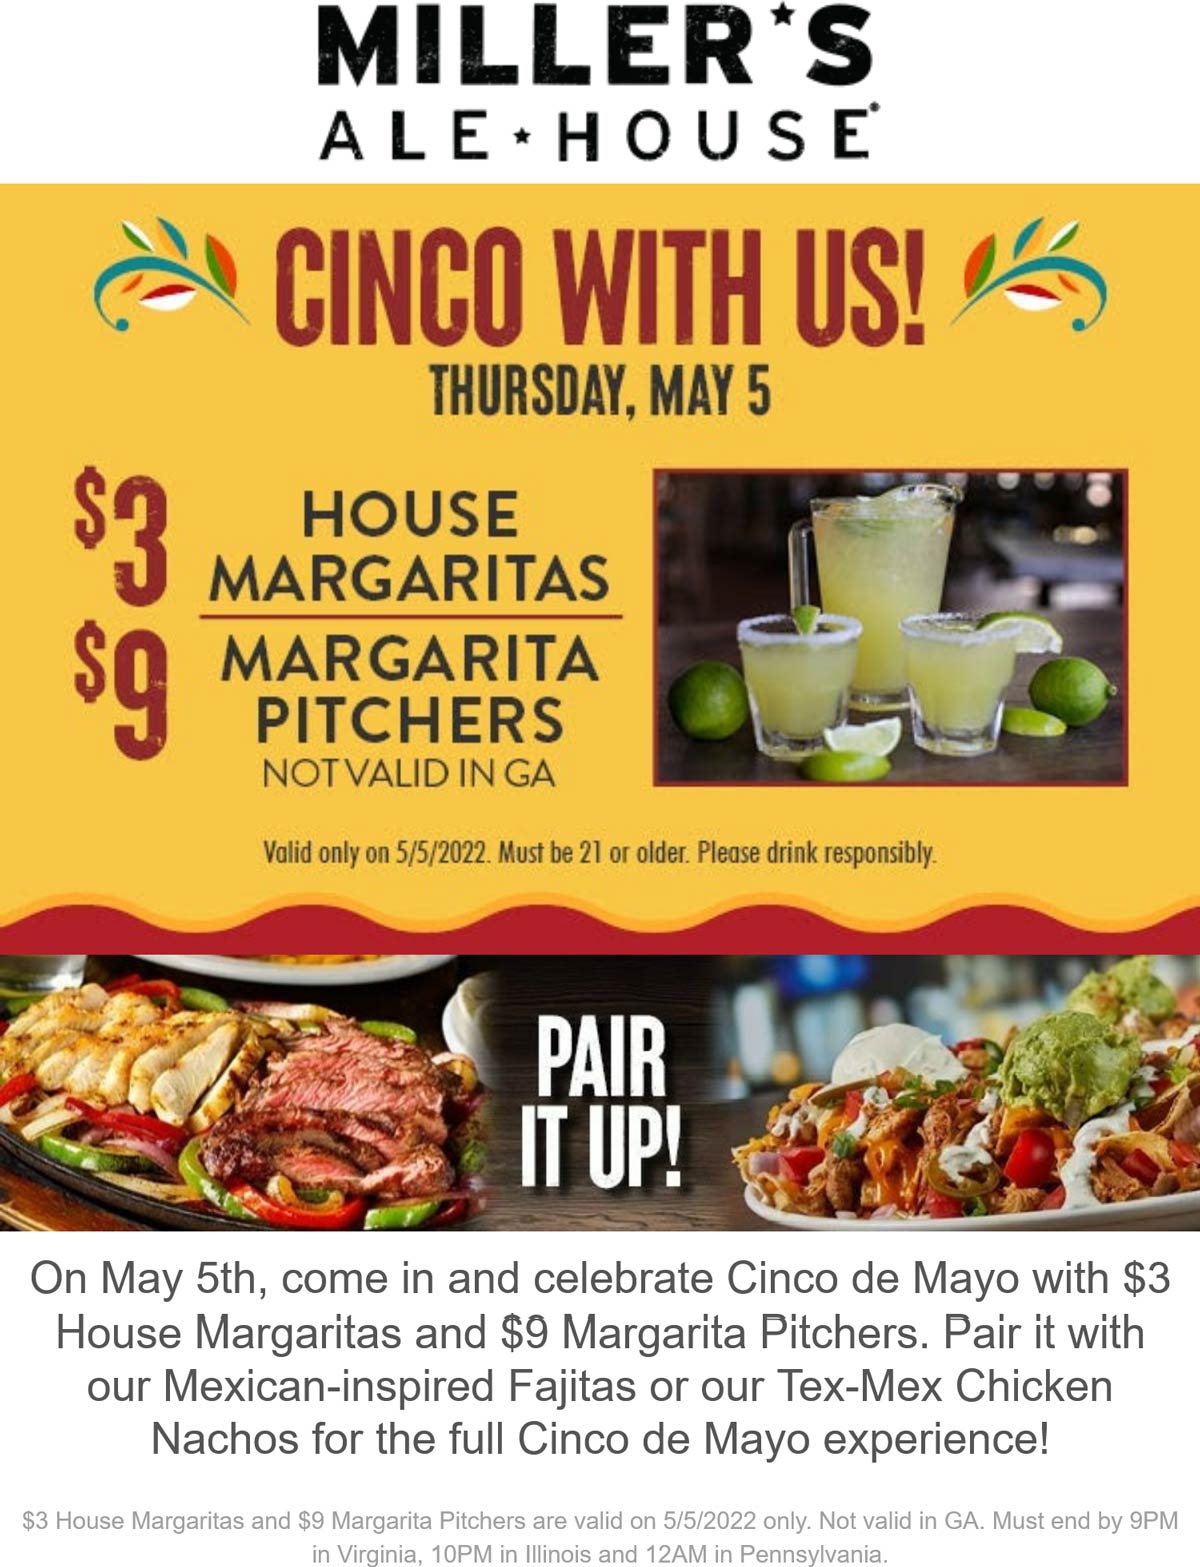 Millers Ale House restaurants Coupon  $3 margaritas Thursday at Millers Ale House restaurants #millersalehouse 